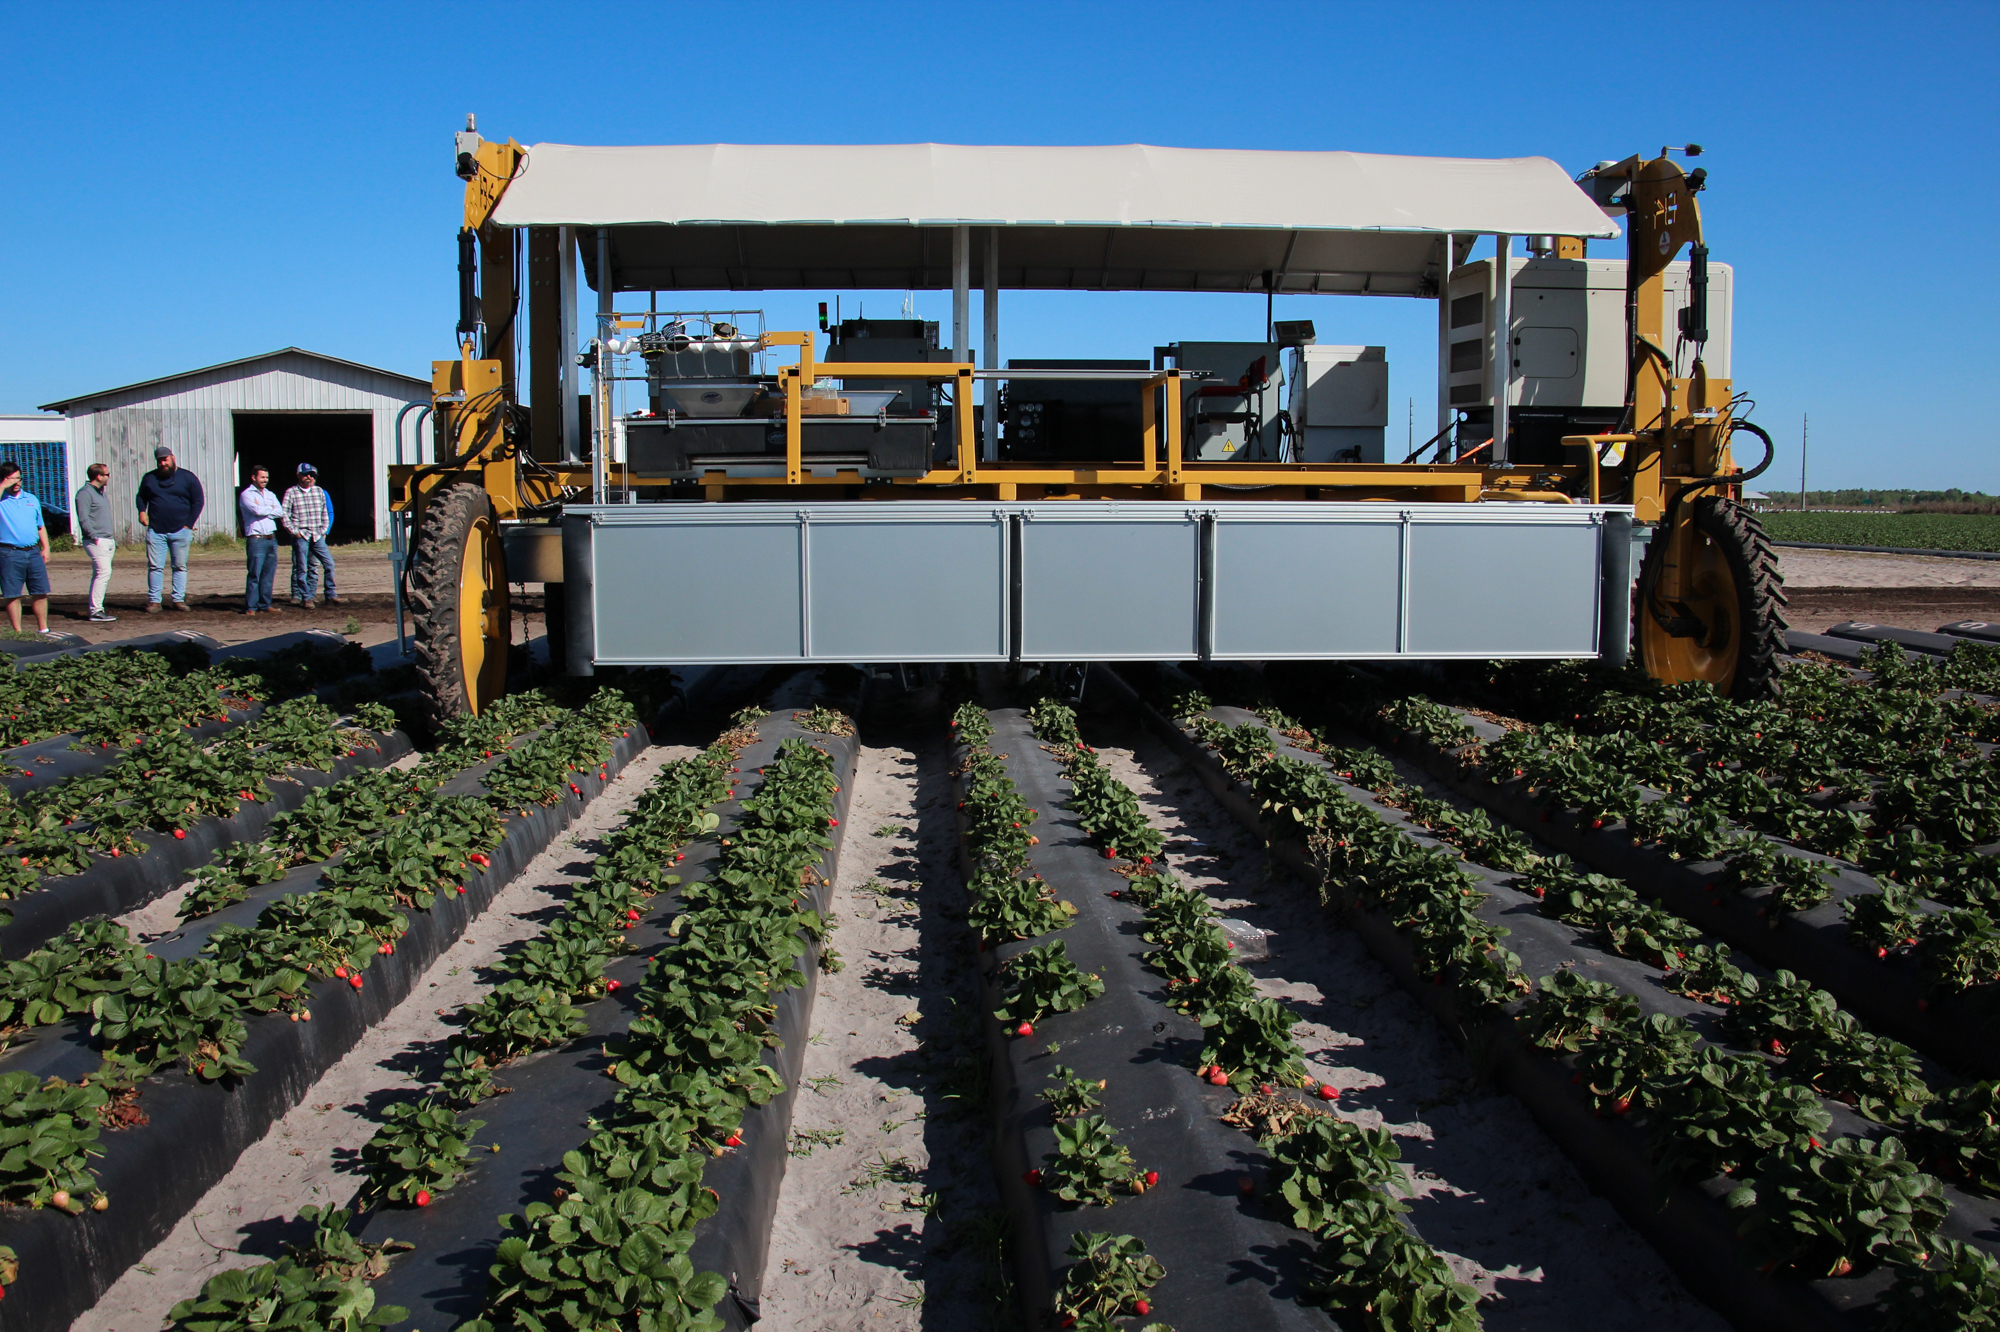 The strawberry-picking robot enters a field near Duette, Fla.